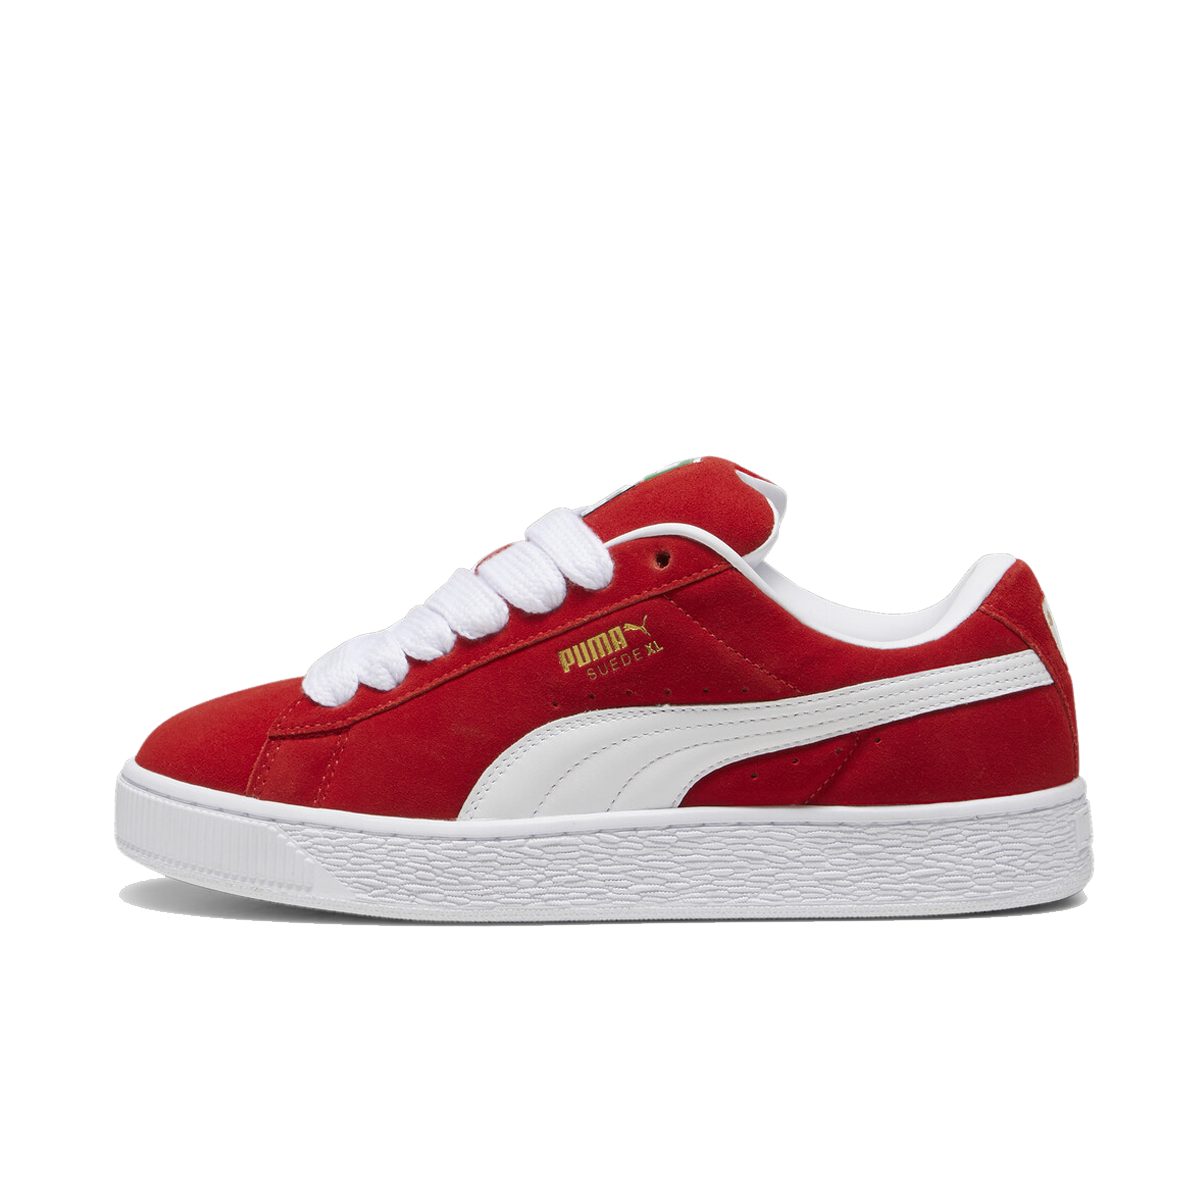 Puma Suede XL 'For All Time Red' 395205-03